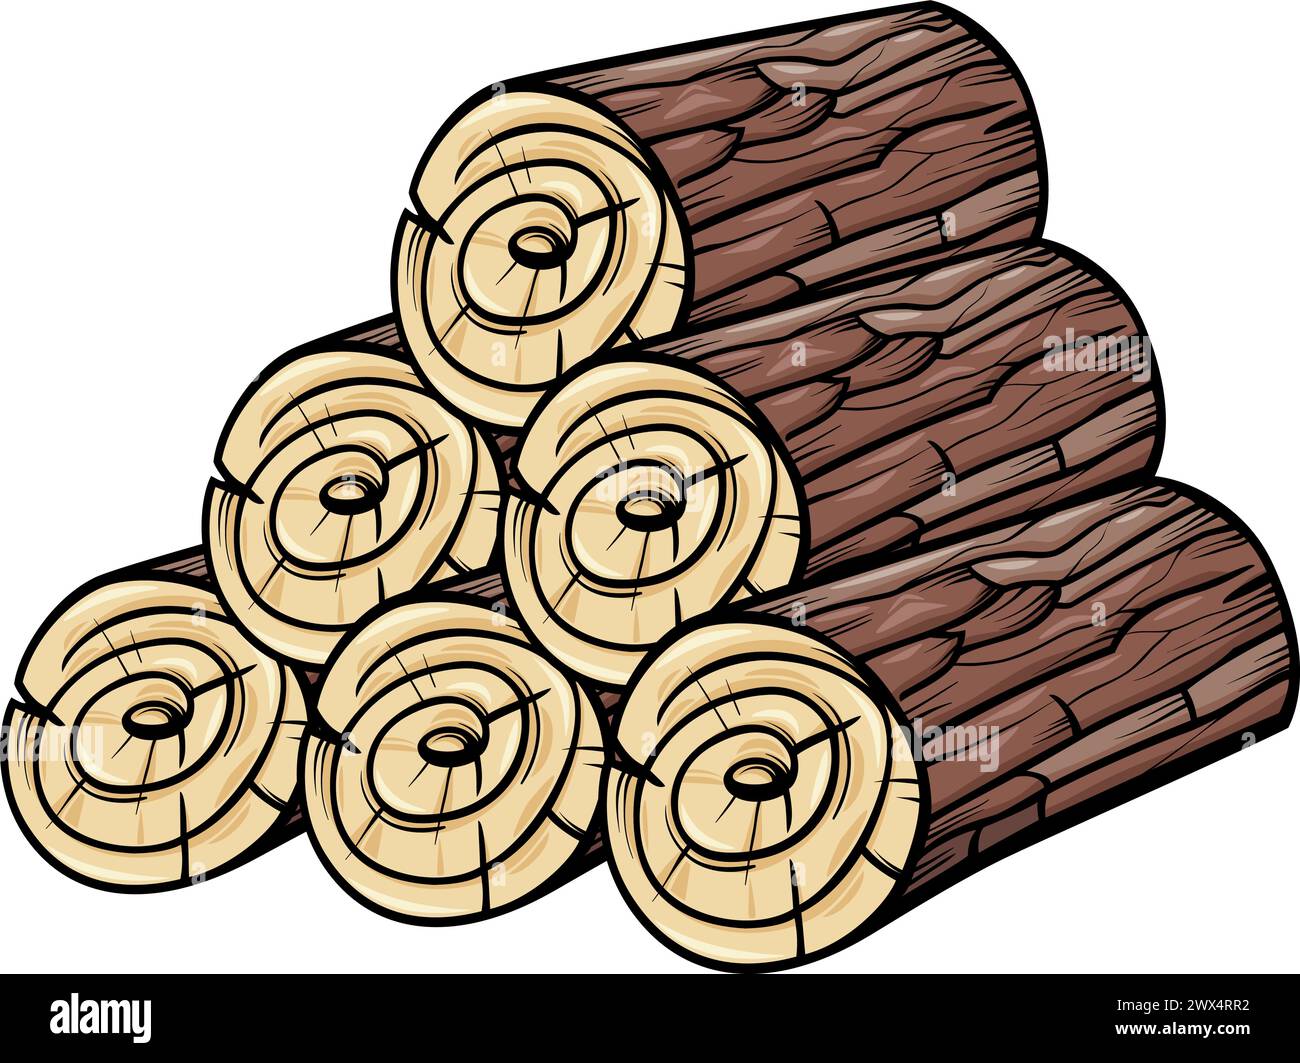 Cartoon illustration of pile of wooden logs or stumps clip art Stock Vector